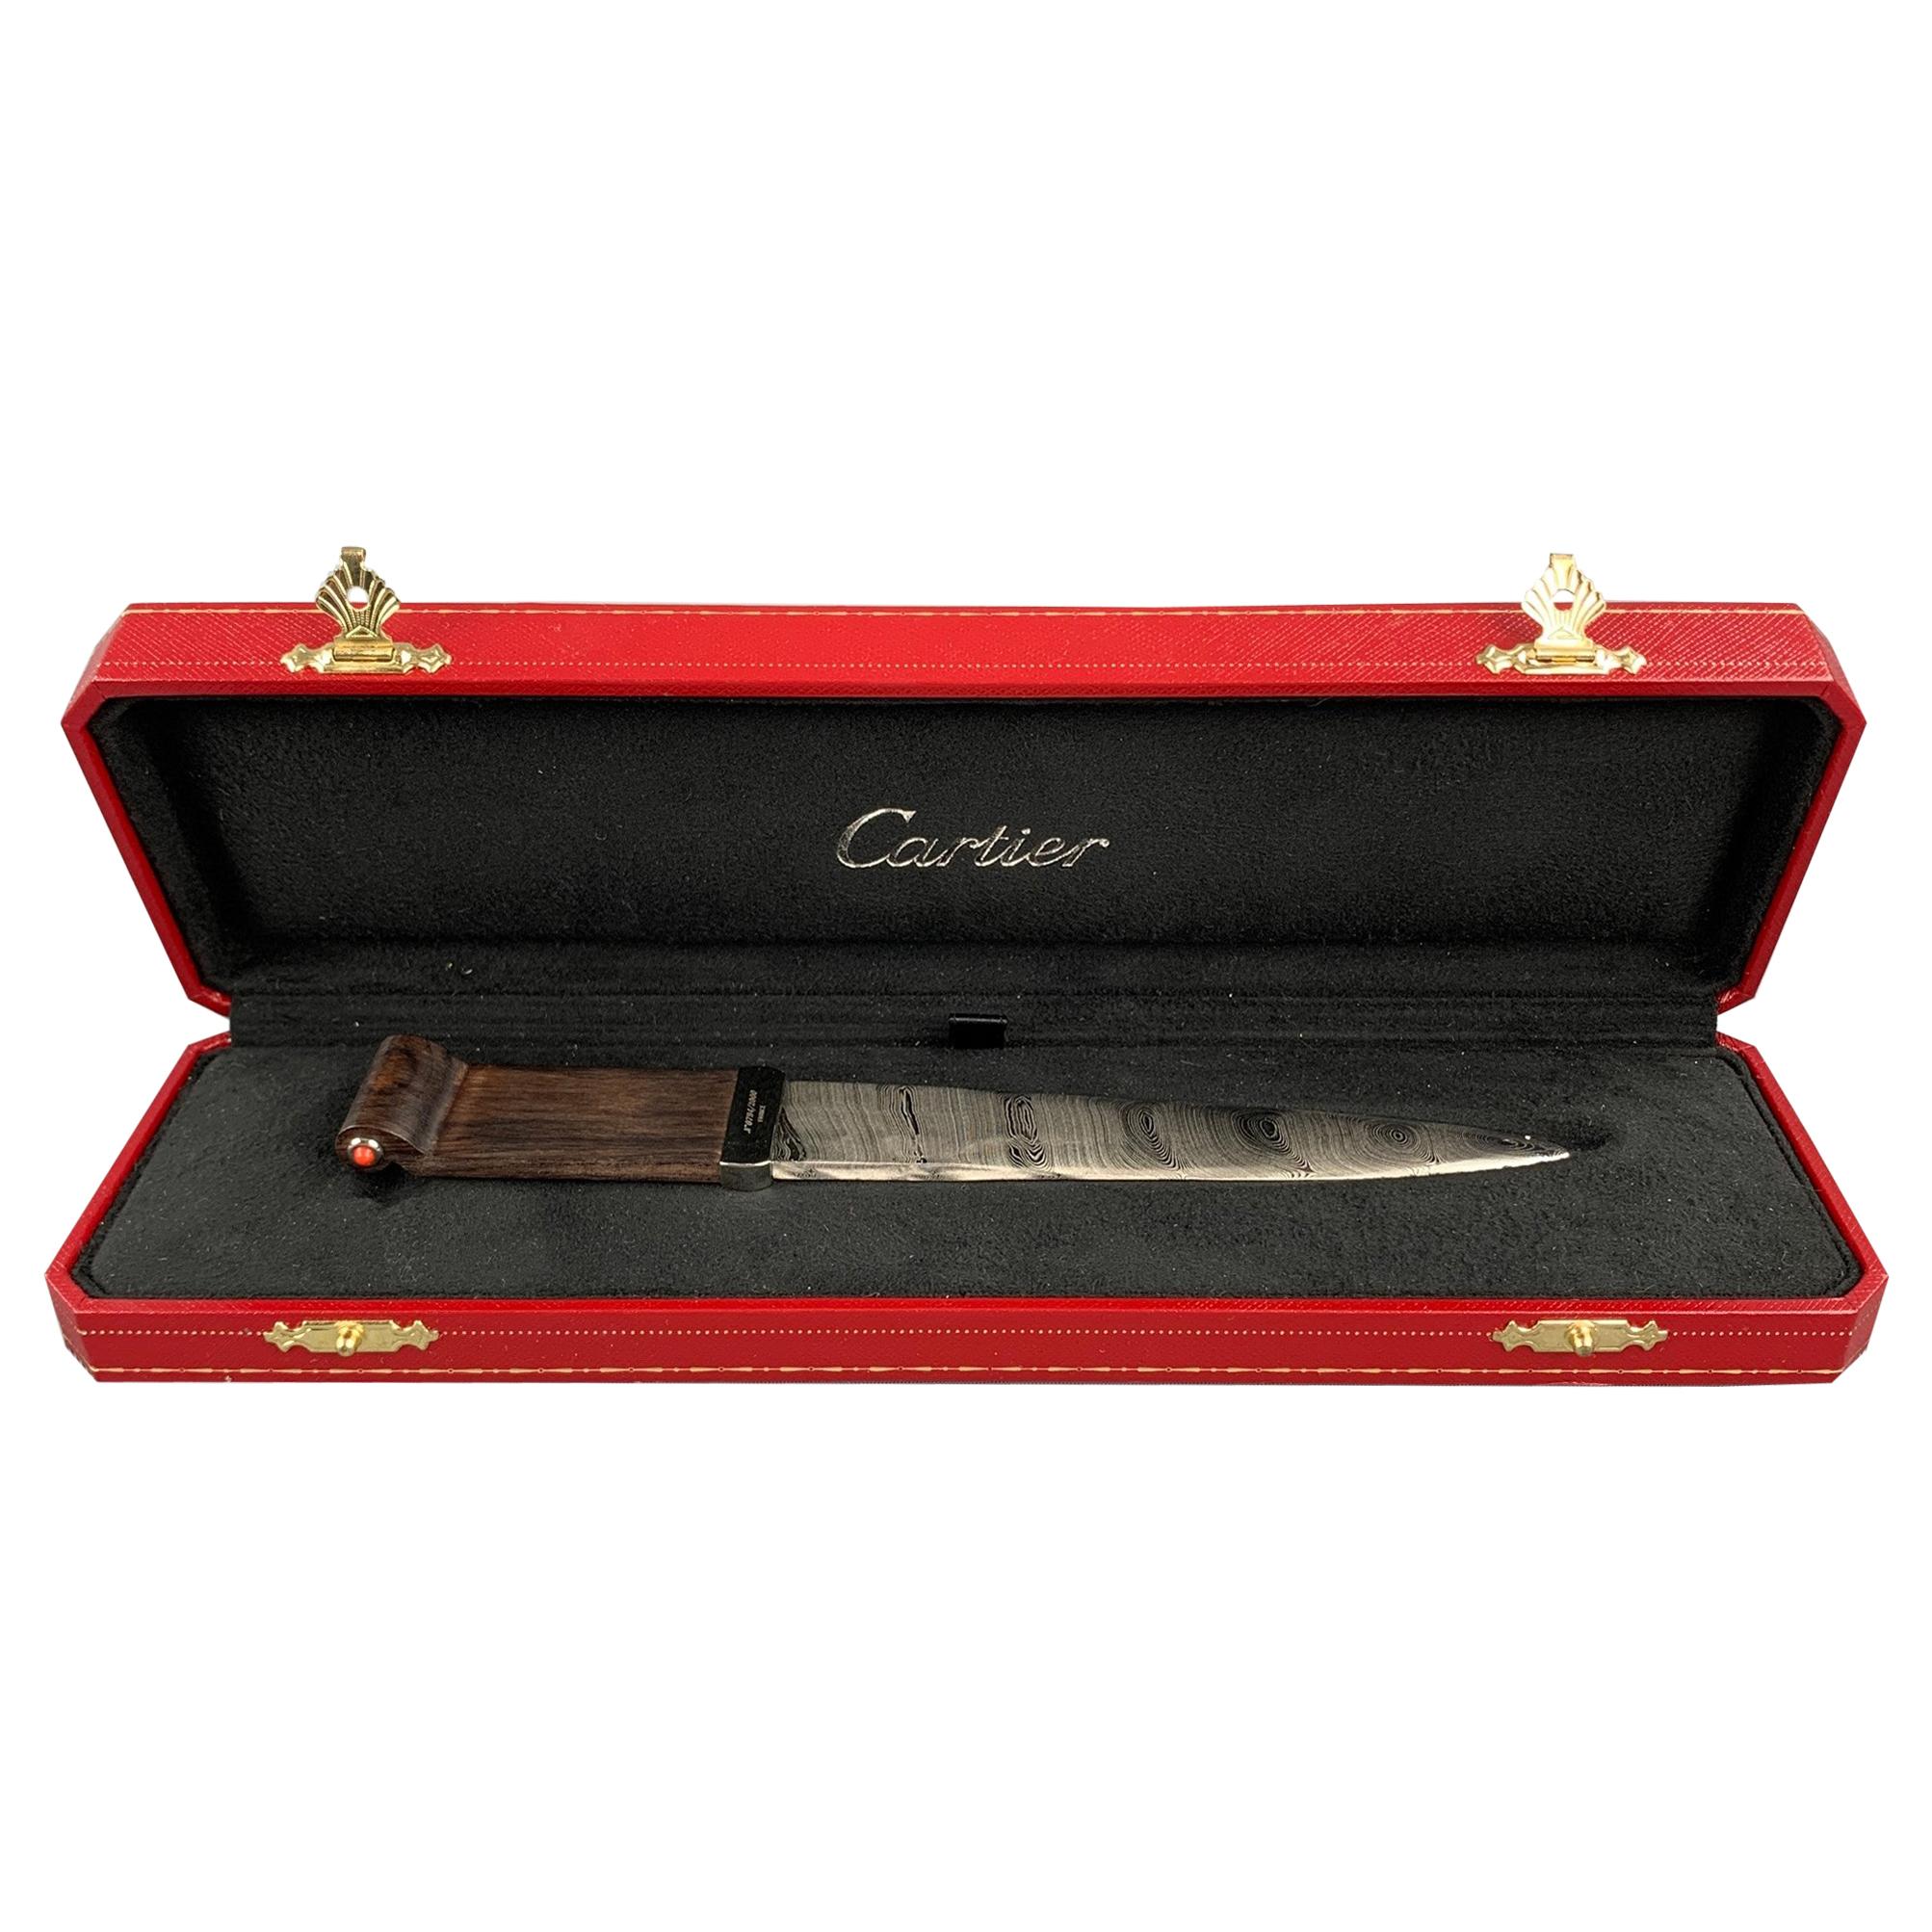 CARTIER Limited Edition Damas Steel Grenaille Wood & Coral Knife / Envelope Open